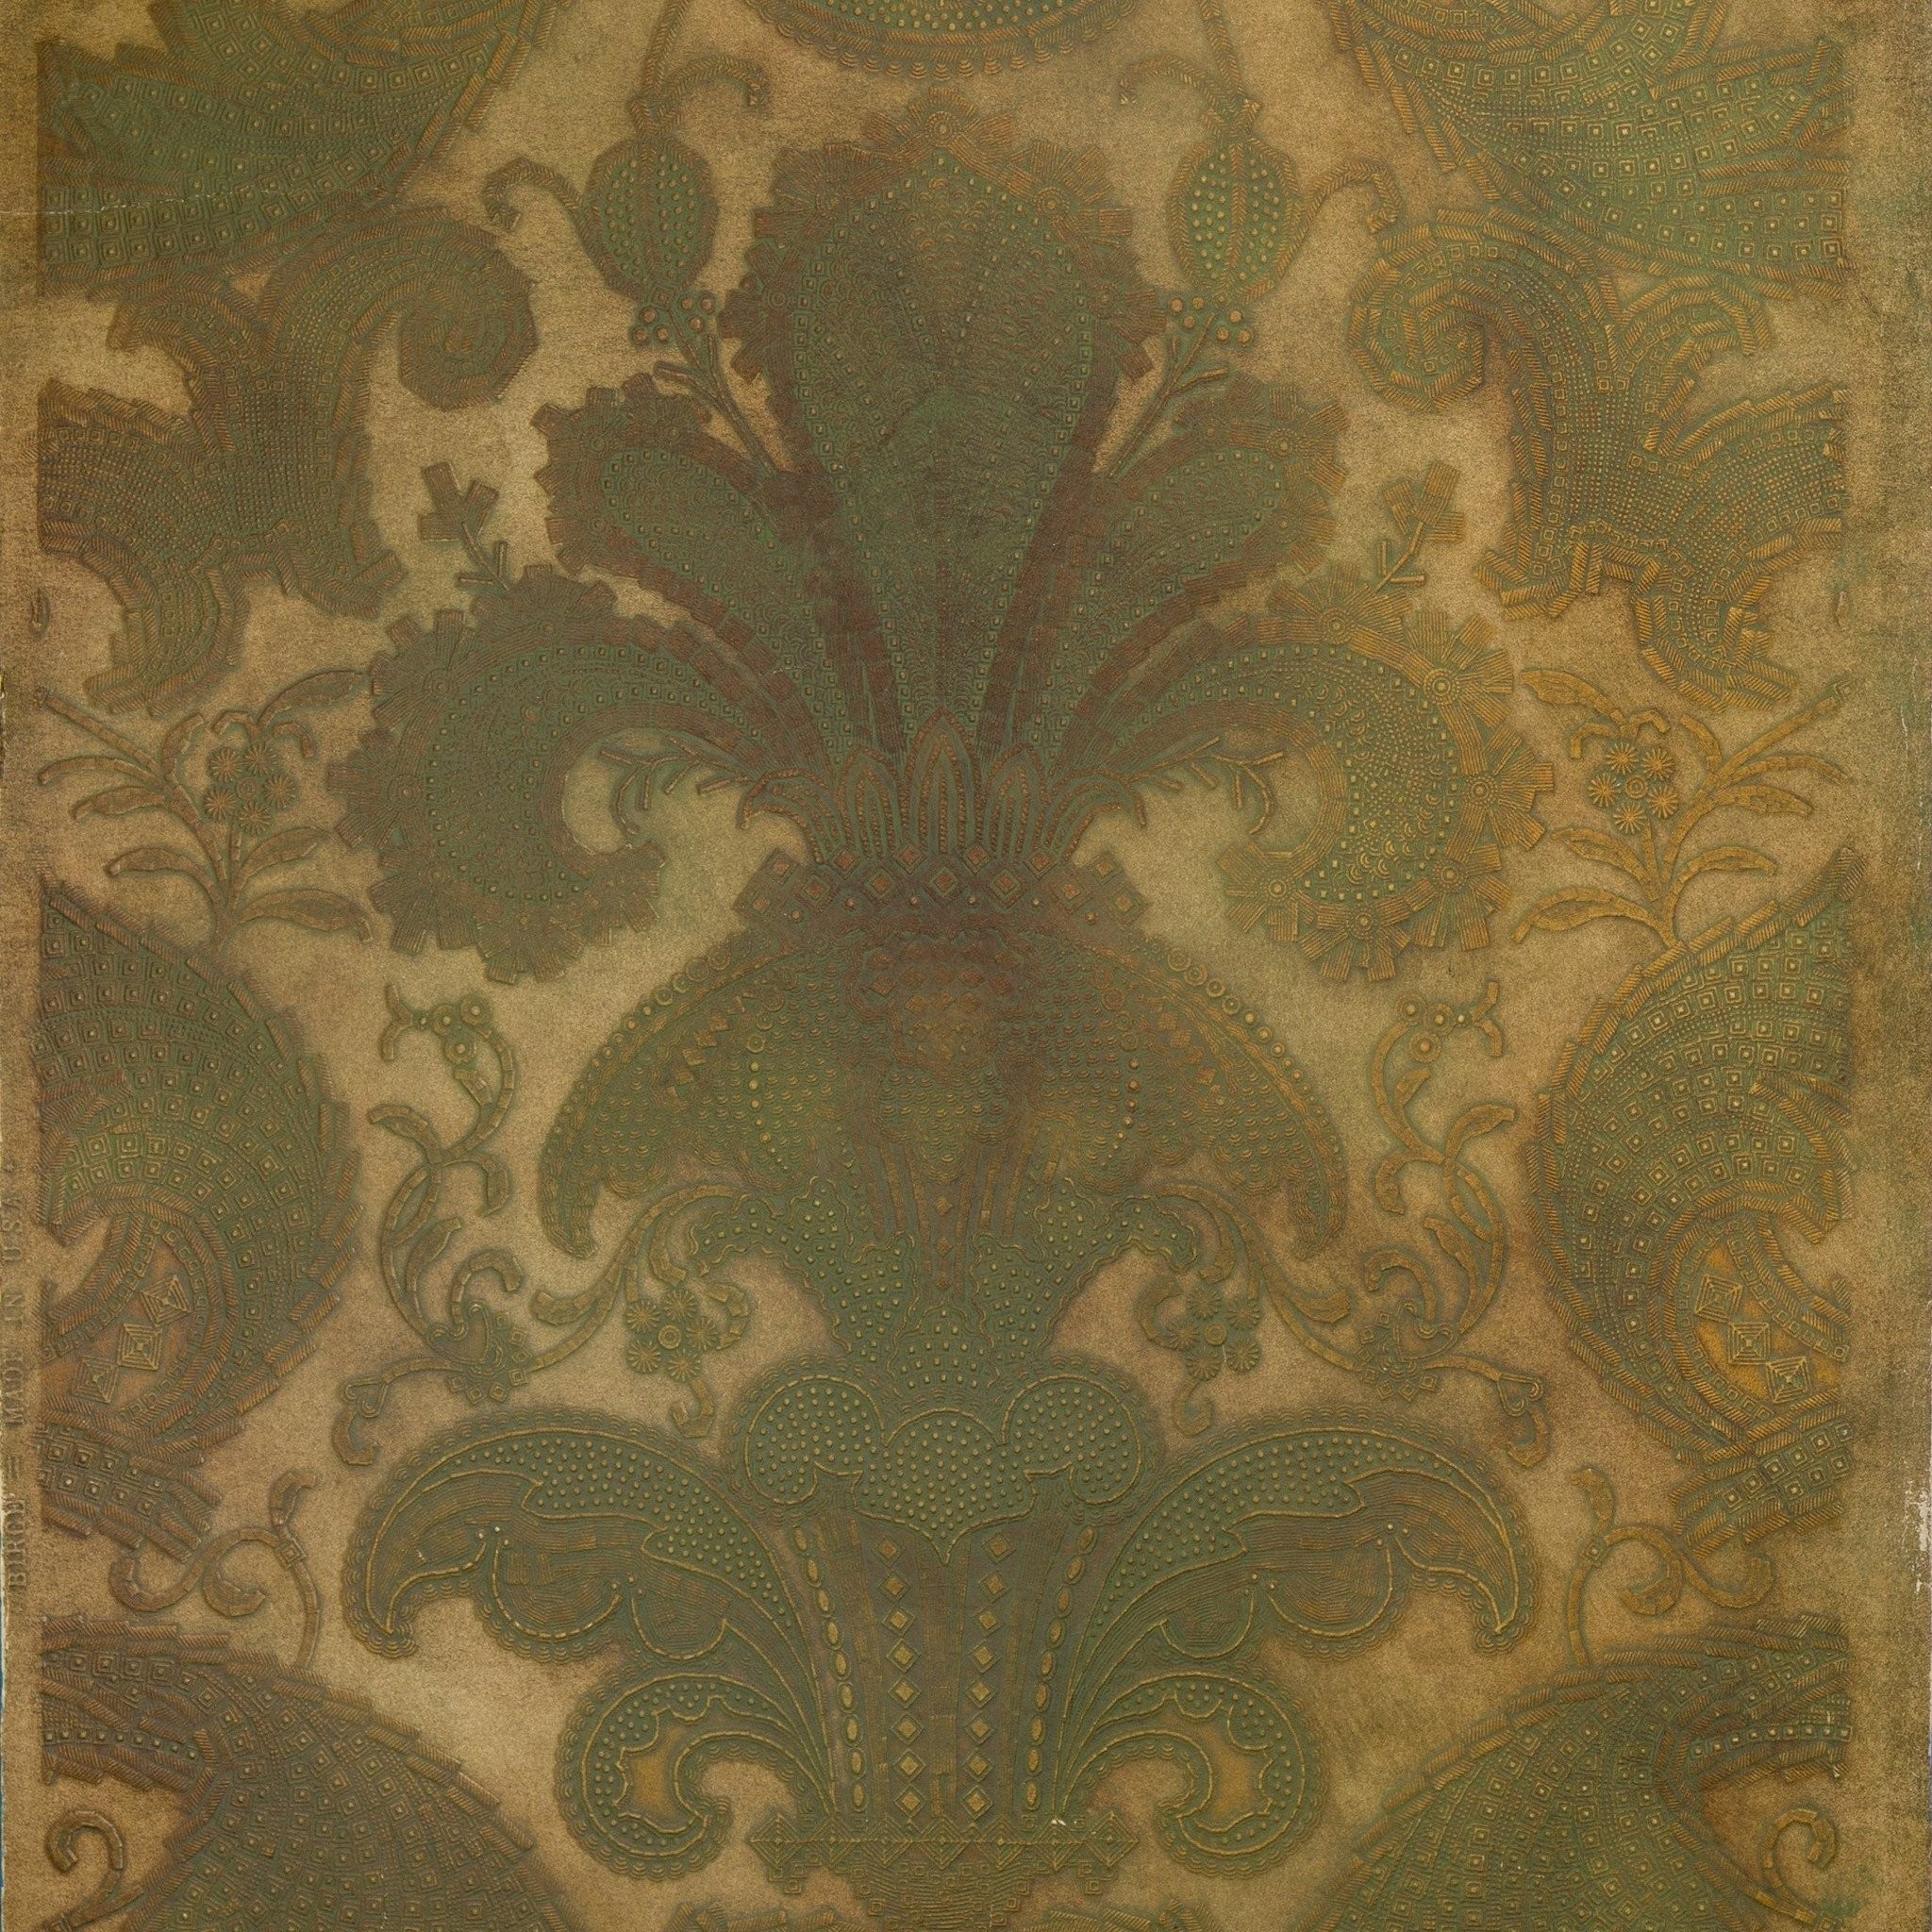 2048x2048 Tooled Leather Damask - Antique Wallpaper Remnant